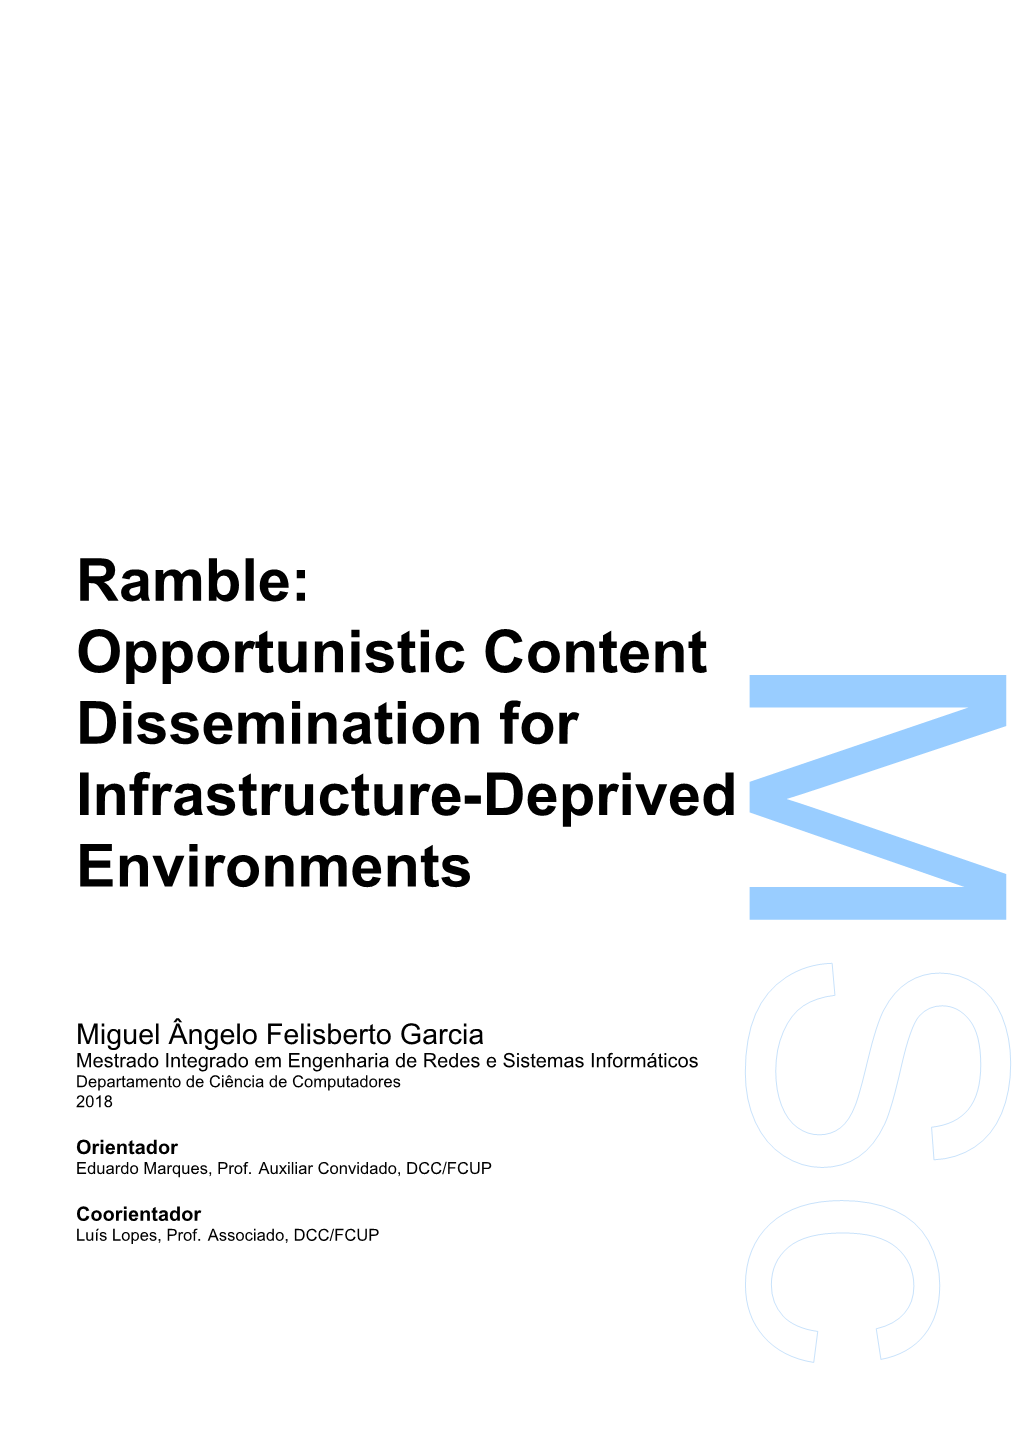 Ramble: Opportunistic Content M Dissemination for Infrastructure-Deprived Environments